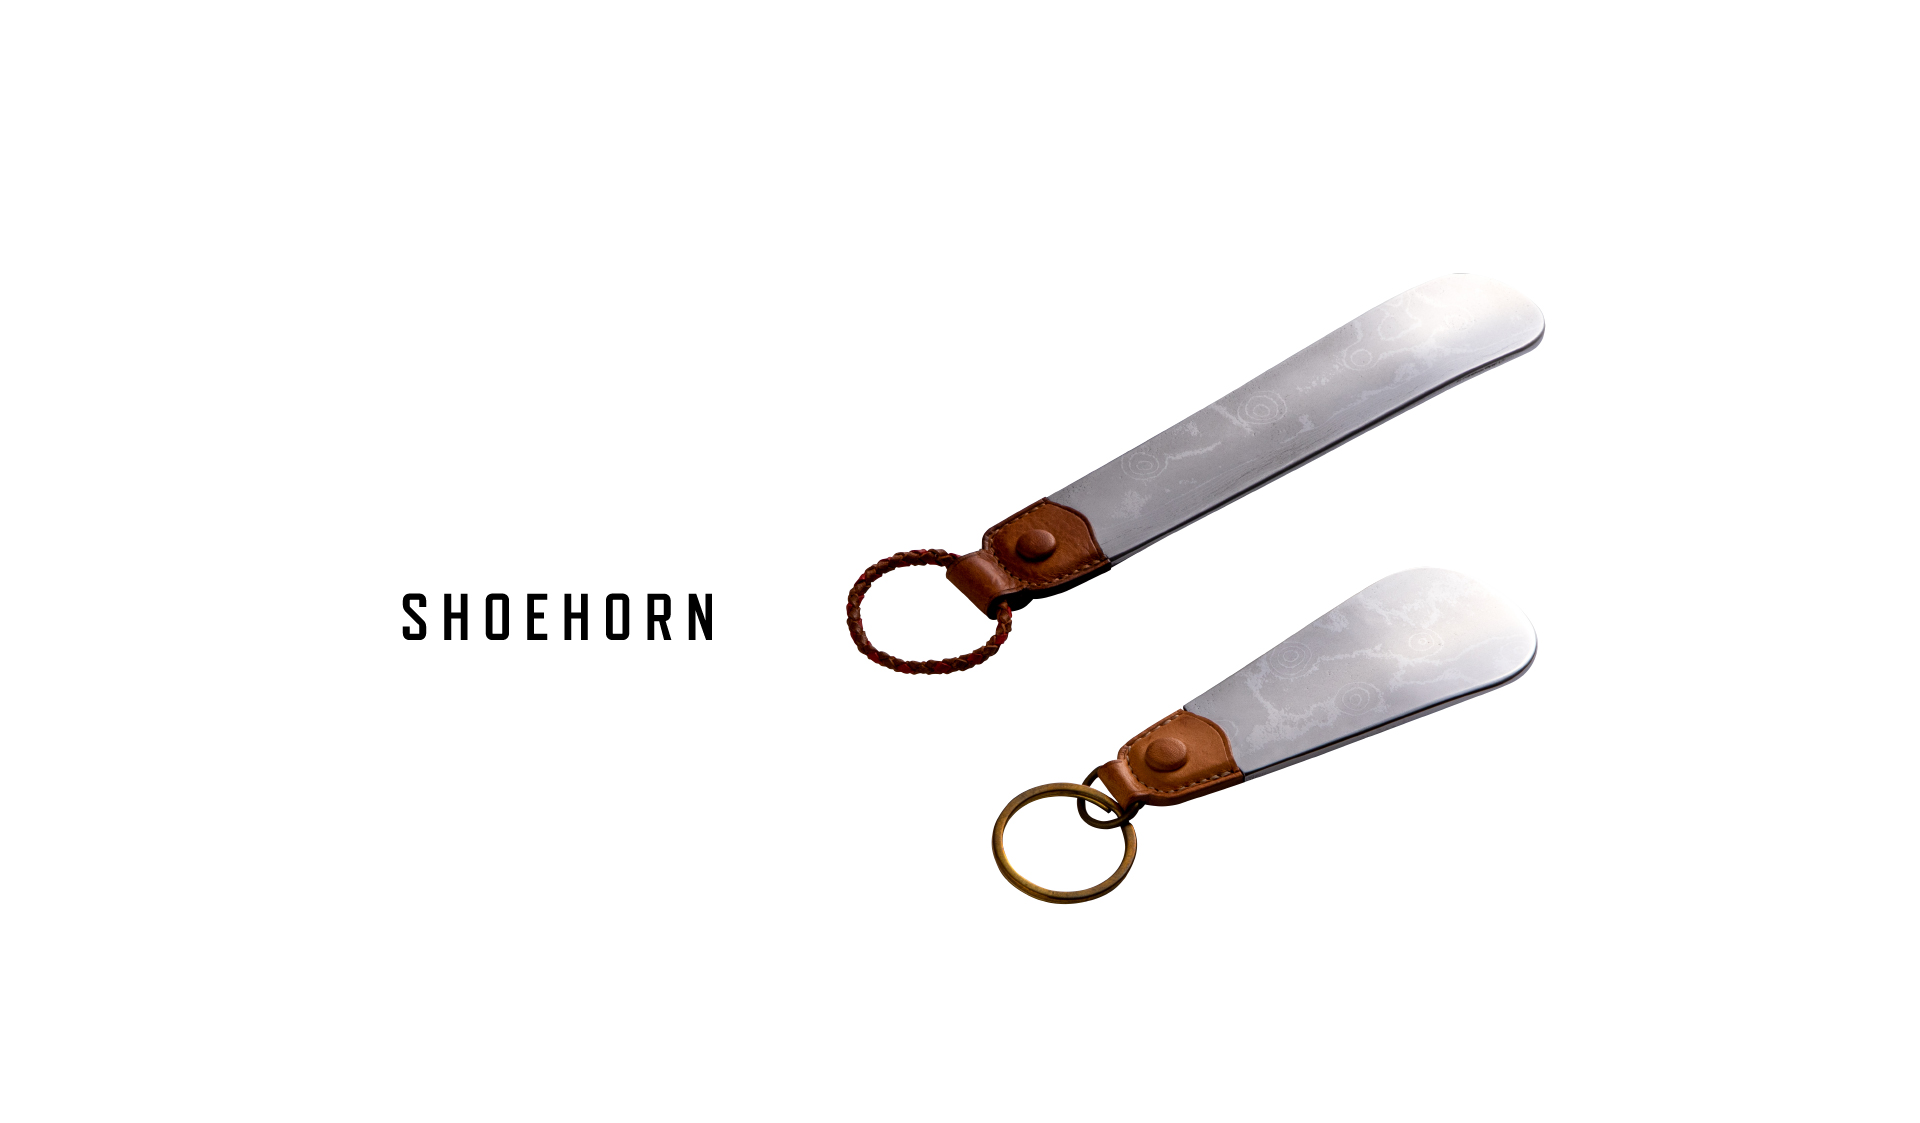 SHOEHORN